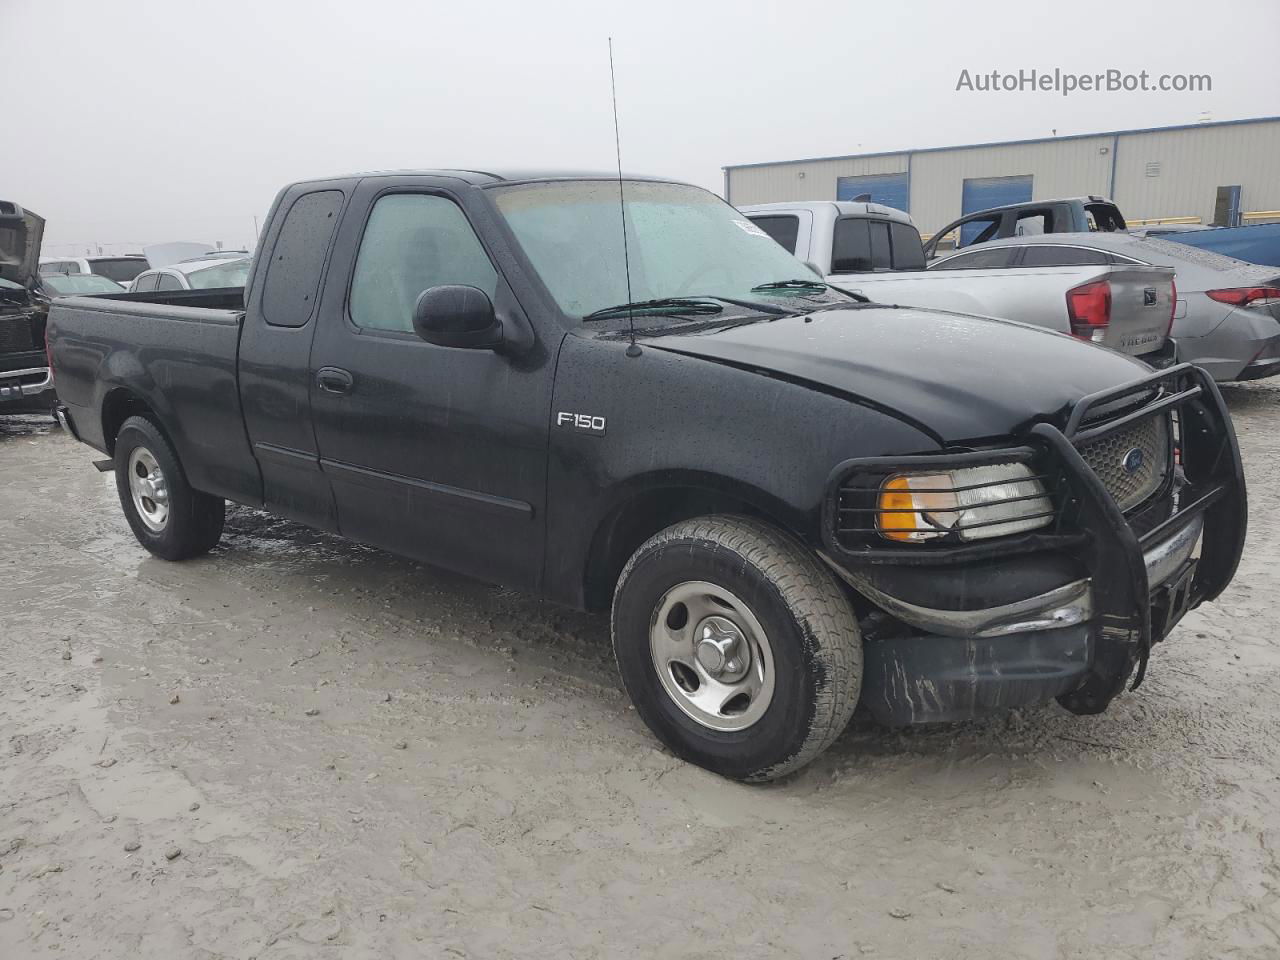 2001 Ford F150  Black vin: 1FTZX17261KC06512